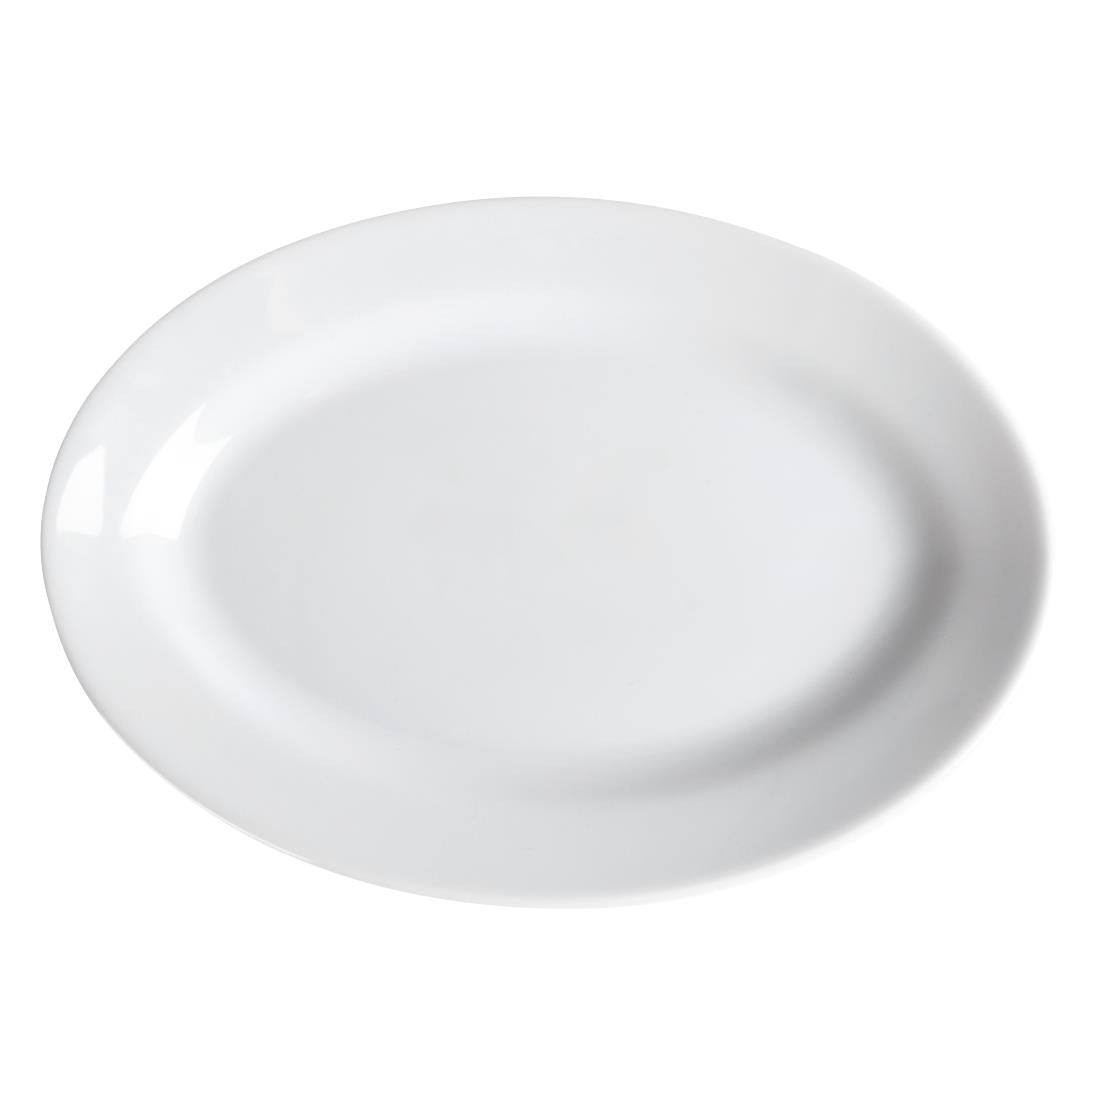 CG120 Royal Porcelain Oriental Oval Plates 230mm length (Pack of 12)